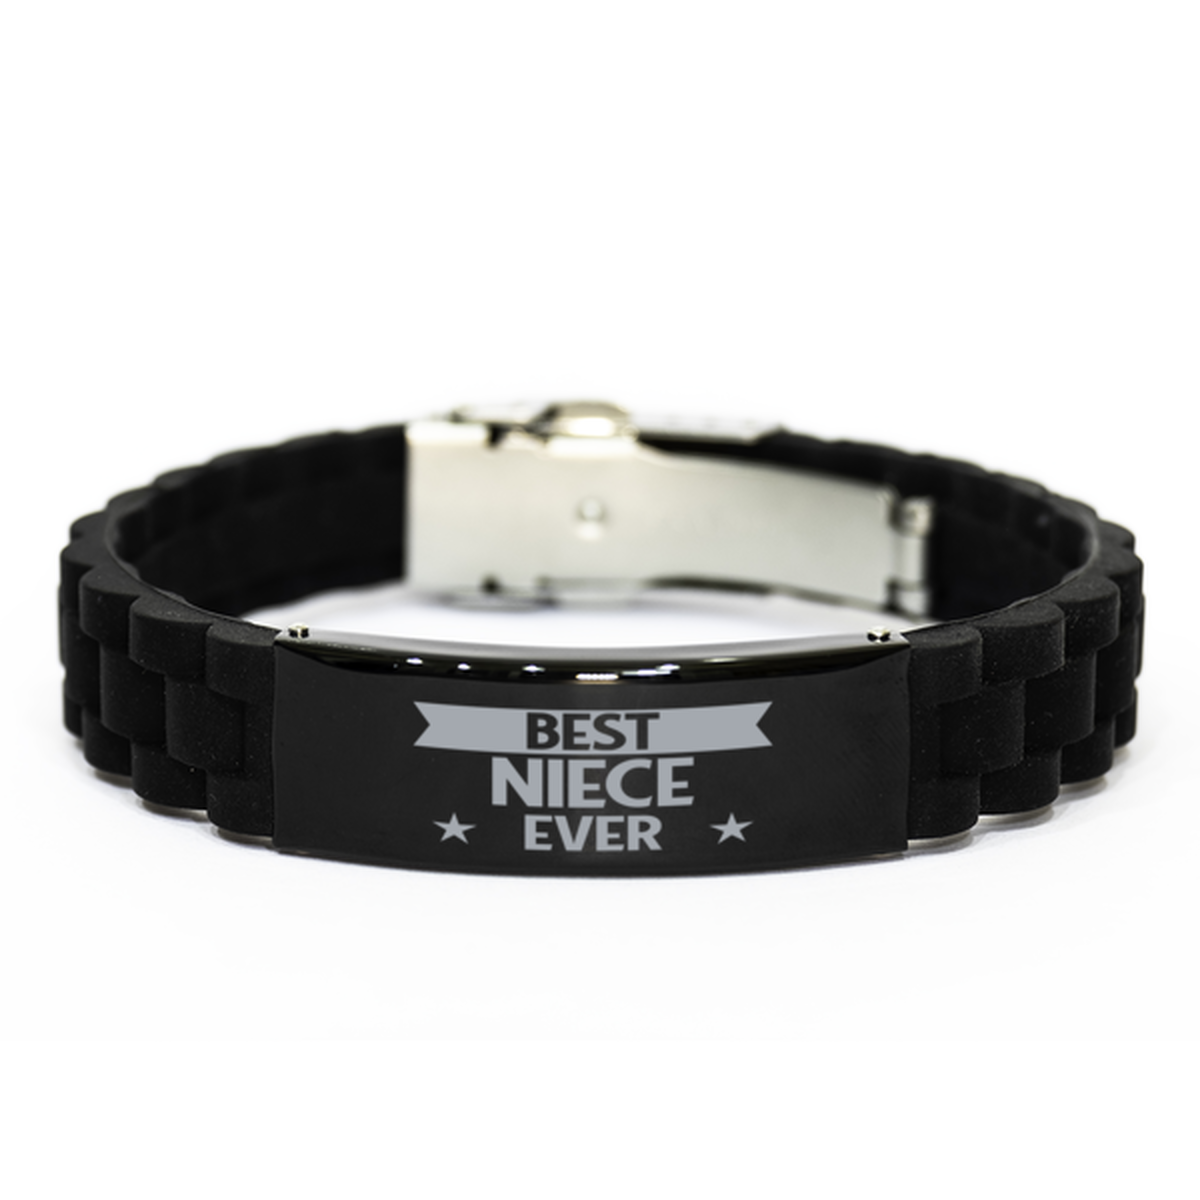 Best Niece Ever Niece Gifts, Funny Black Engraved Bracelet For Niece, Family Gifts For Women